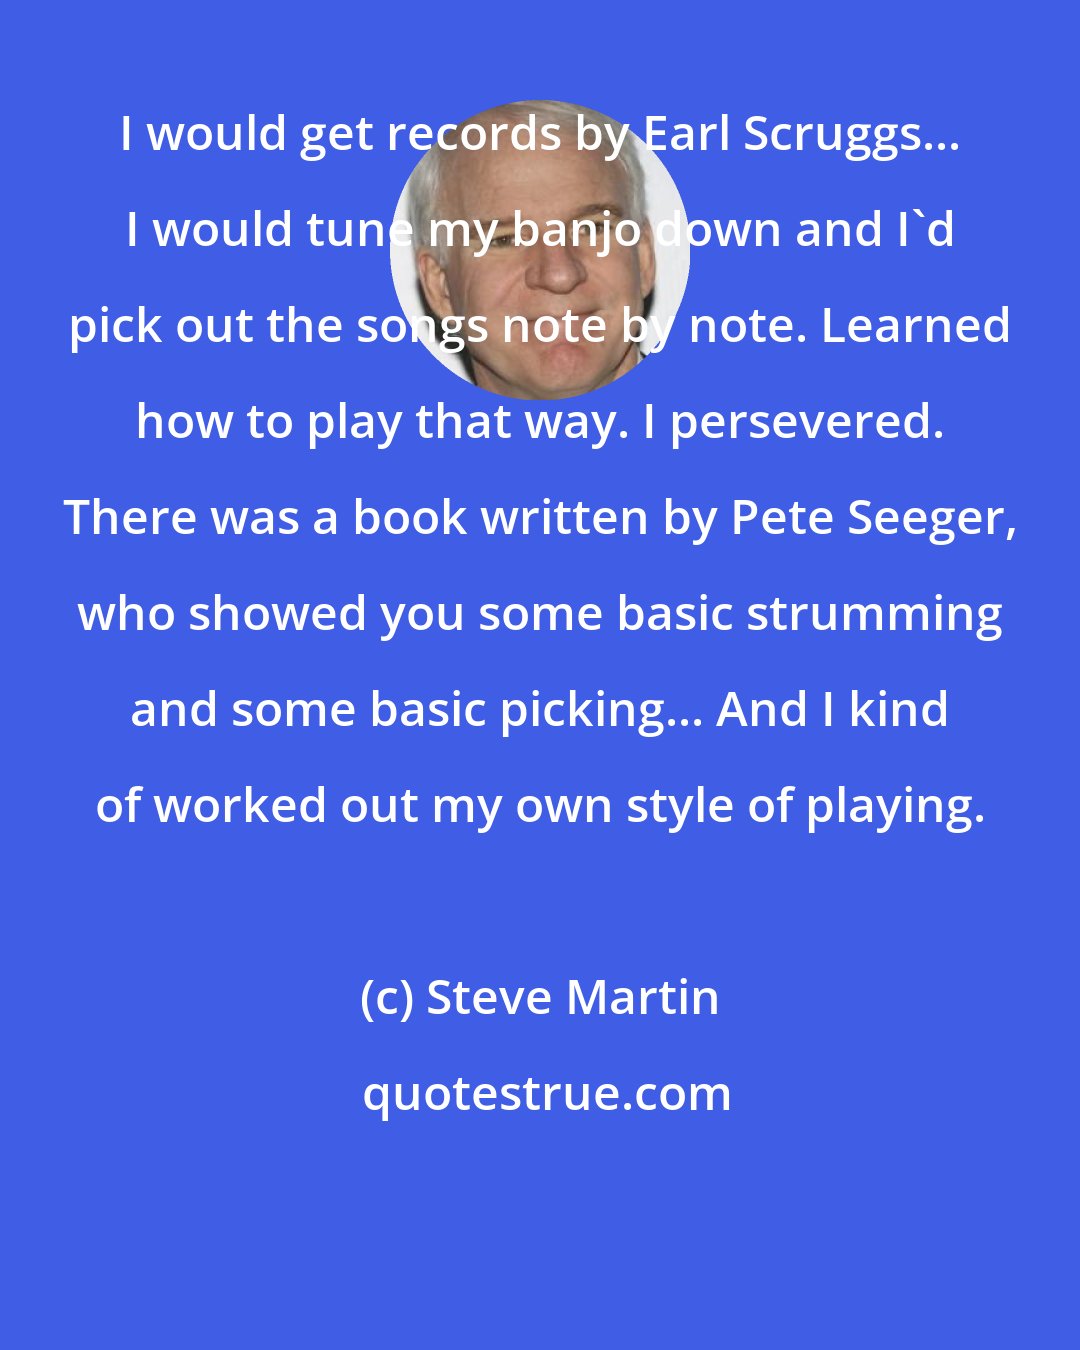 Steve Martin: I would get records by Earl Scruggs... I would tune my banjo down and I'd pick out the songs note by note. Learned how to play that way. I persevered. There was a book written by Pete Seeger, who showed you some basic strumming and some basic picking... And I kind of worked out my own style of playing.